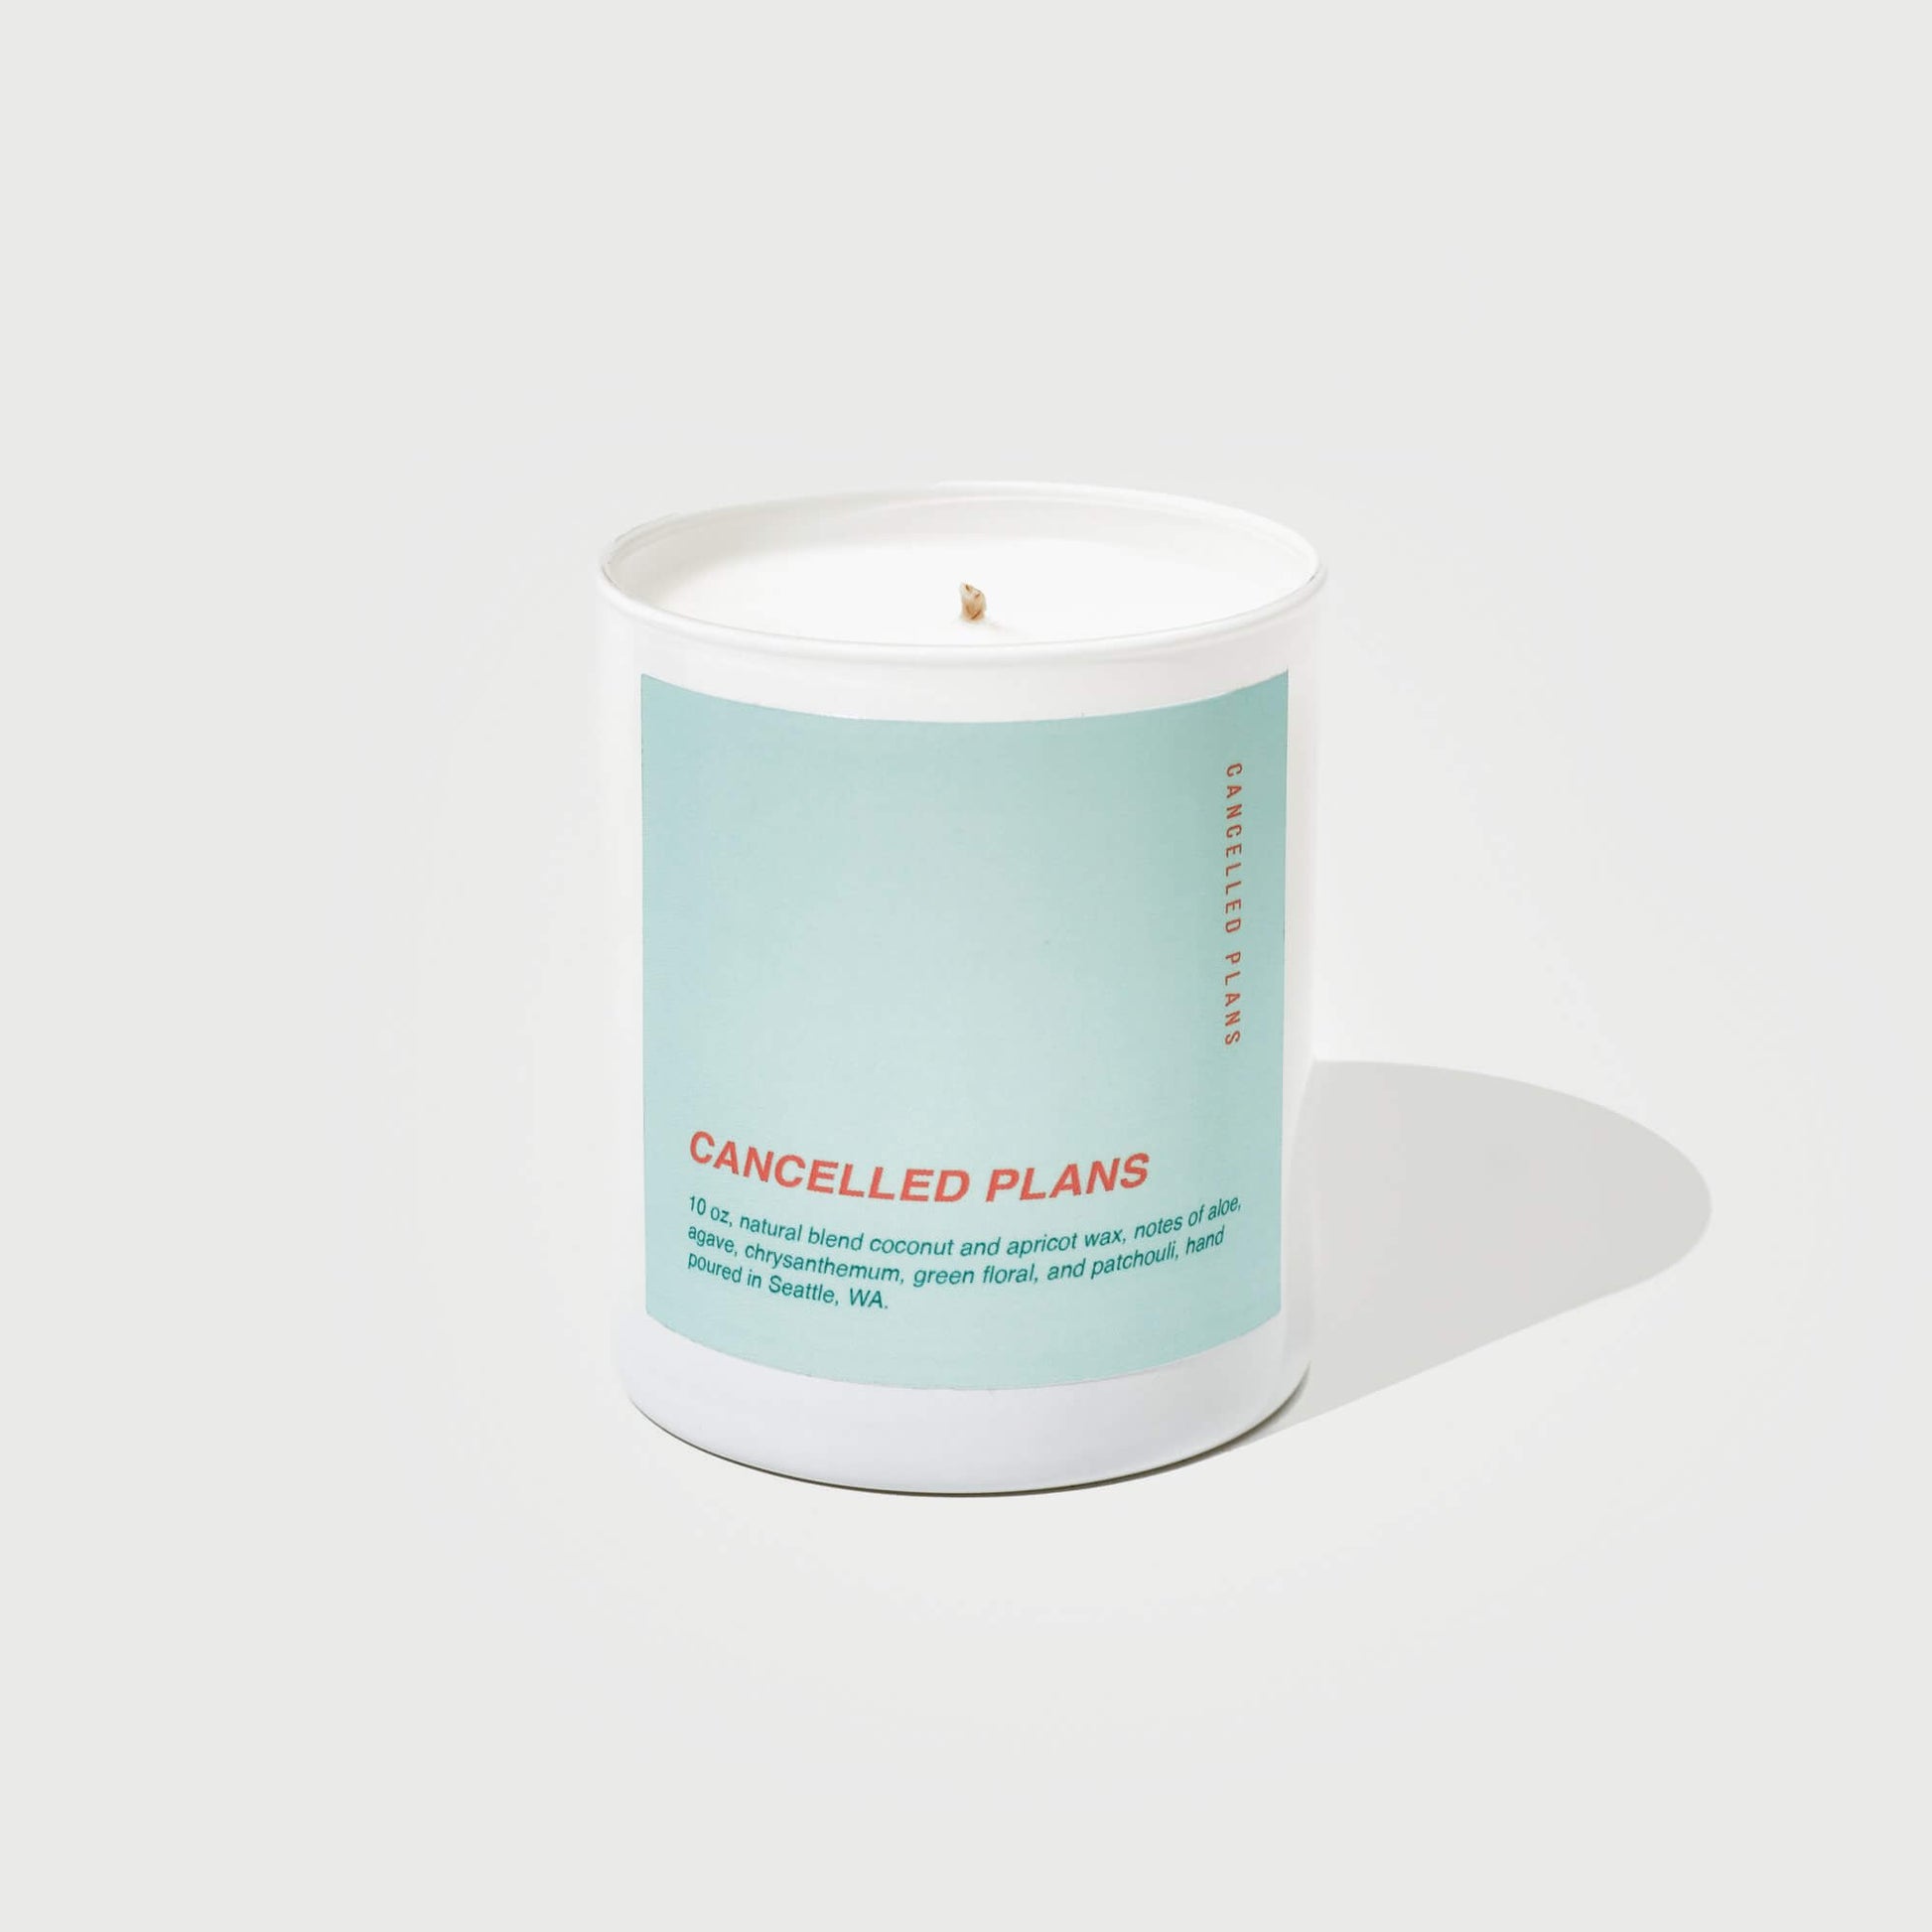 Cancelled Plans Scented Candle by Cancelled Plans